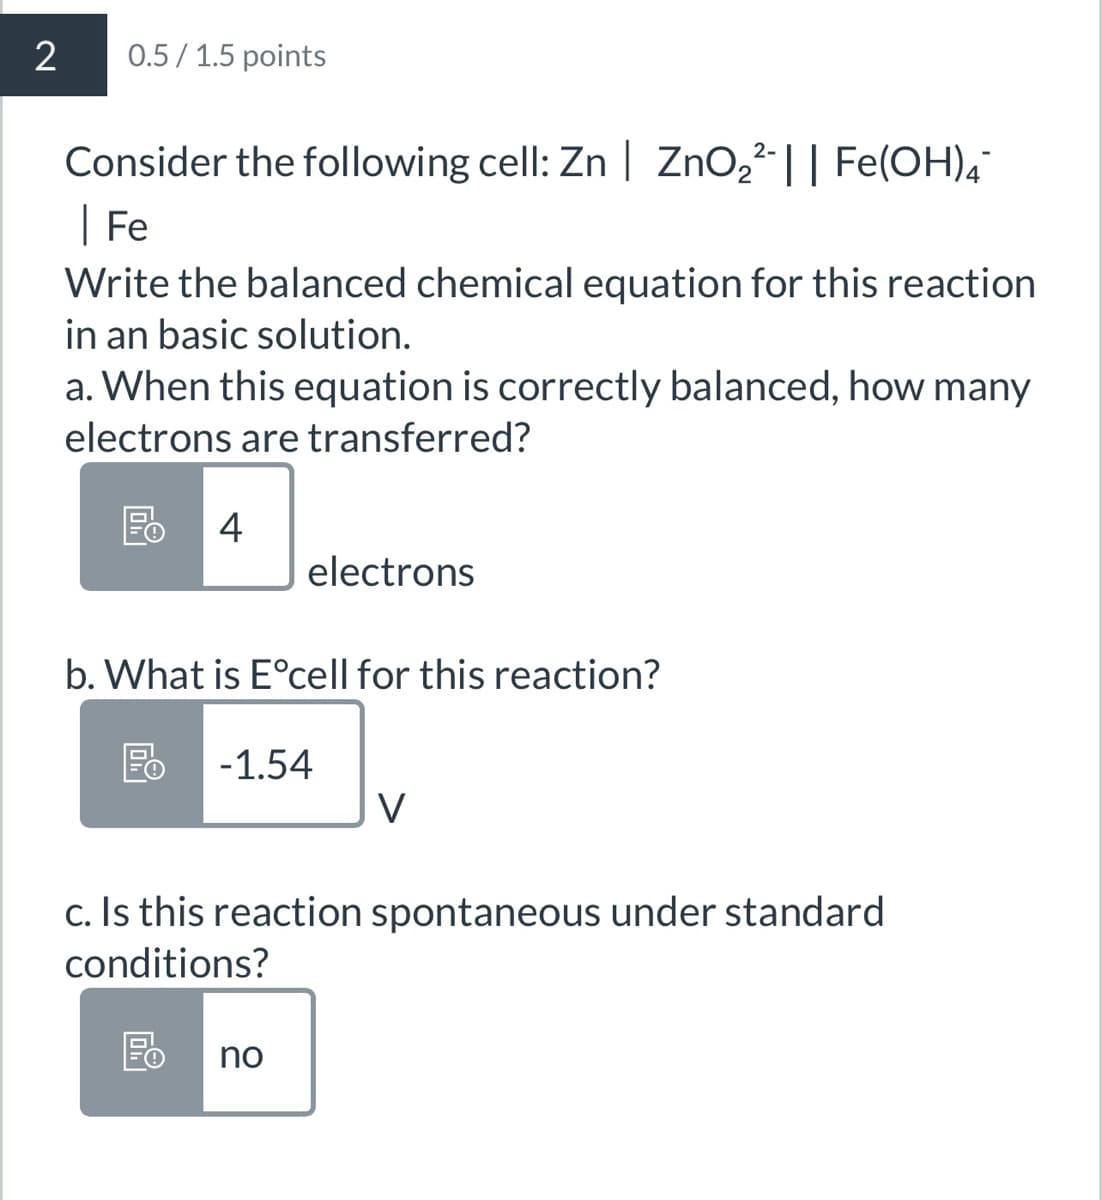 2
0.5/1.5 points
2-
Consider the following cell: Zn | ZnO₂²¯|| Fe(OH)4¯
|Fe
Write the balanced chemical equation for this reaction
in an basic solution.
a. When this equation is correctly balanced, how many
electrons are transferred?
Fo
4
electrons
b. What is E°cell for this reaction?
Fo -1.54
V
c. Is this reaction spontaneous under standard
conditions?
區 no